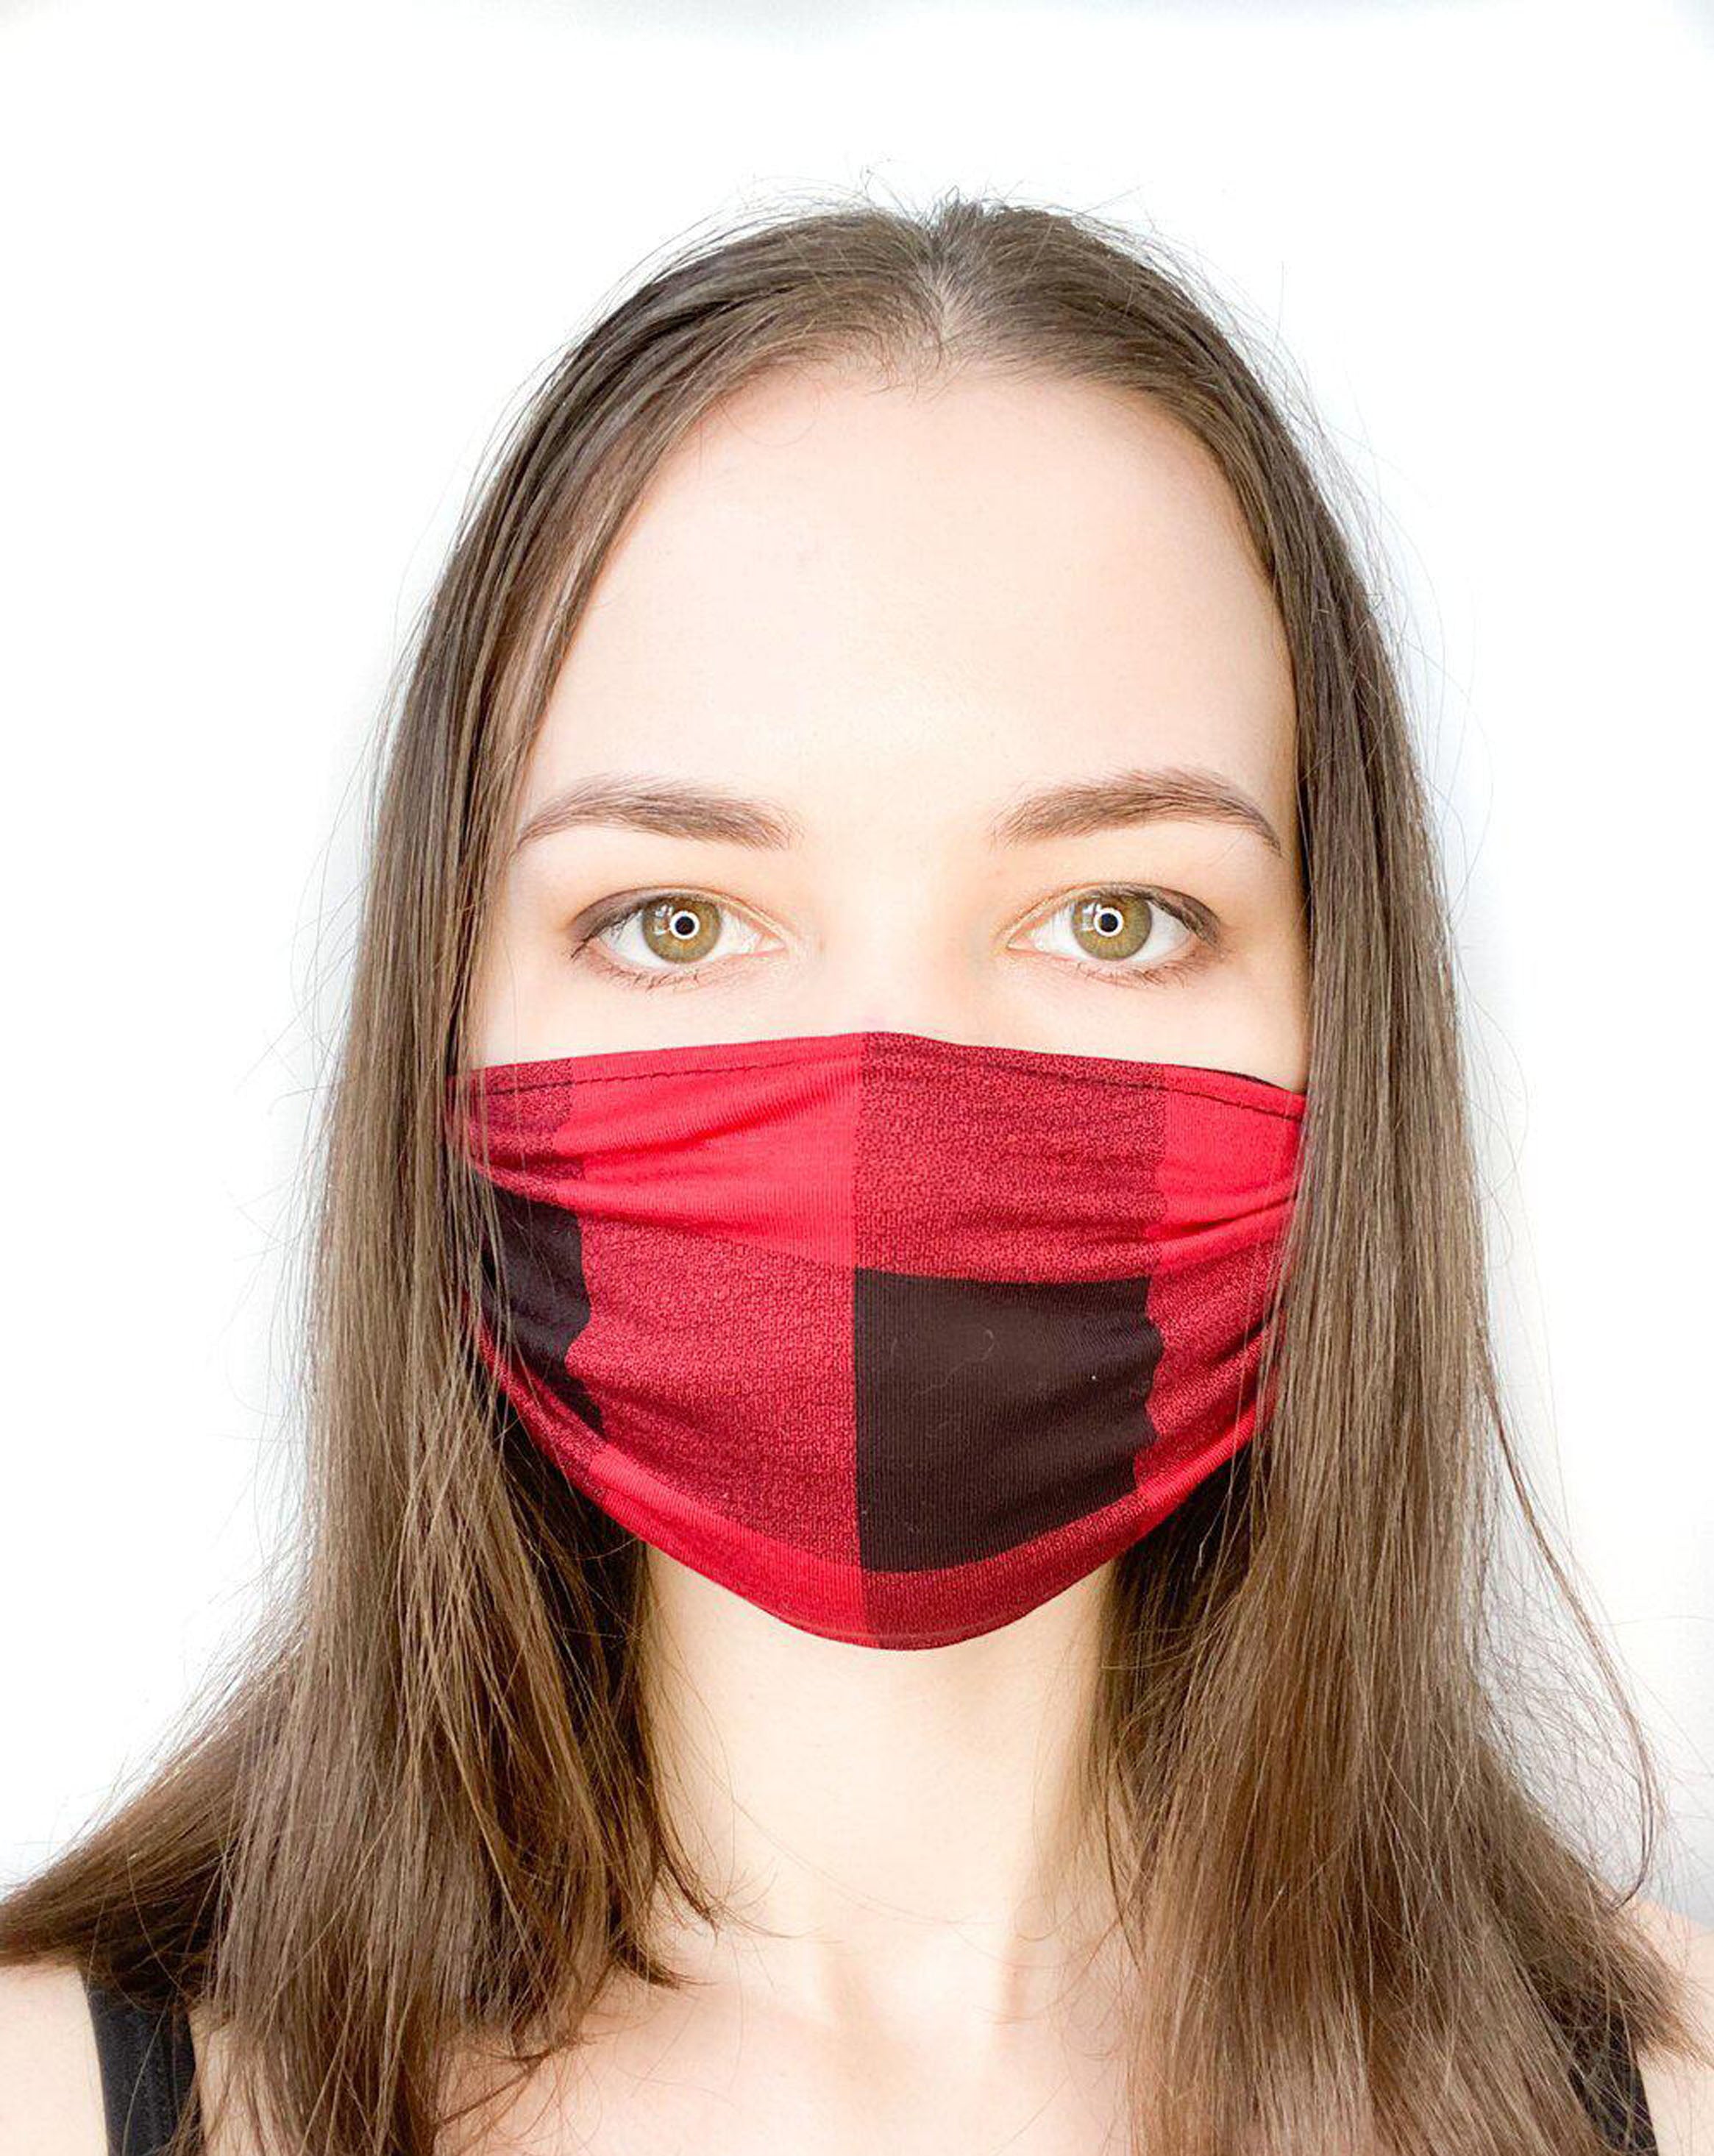 Model with brown hair wearing a black and red plaid, organic cotton facemask.